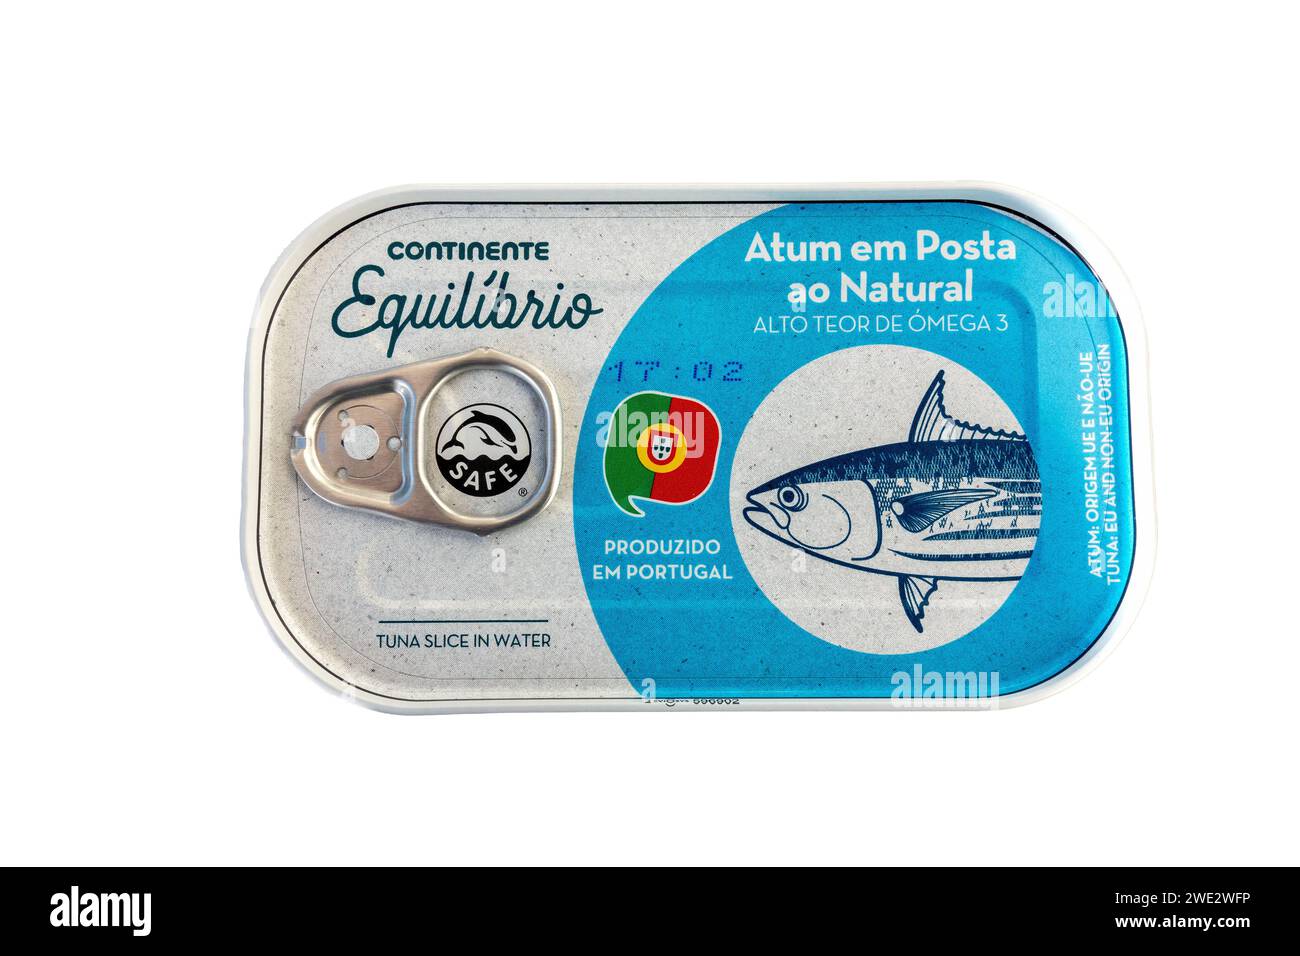 Ring Pull Tin Can Of Tuna Fish In Water Sold By Continente Supermarkets Product Of Portugal, Atum em Posta ao Natural, January 21, 2024 Stock Photo